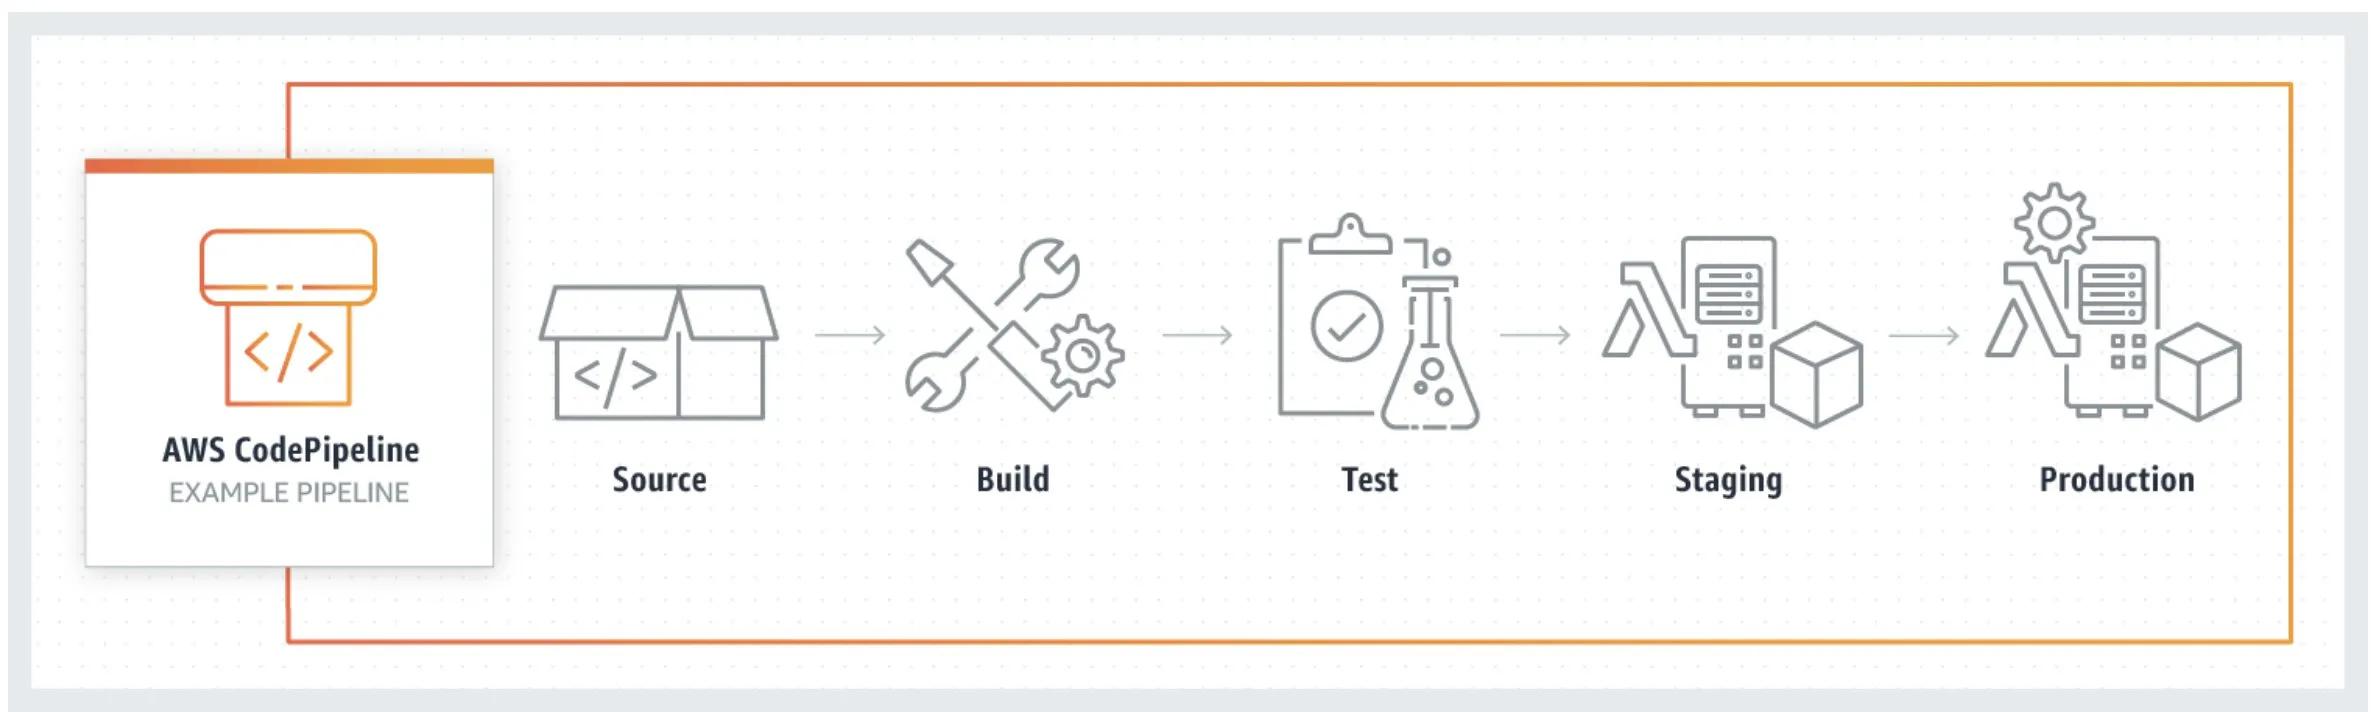 Build a CI/CD Pipeline for EKS Workloads with AWS Services